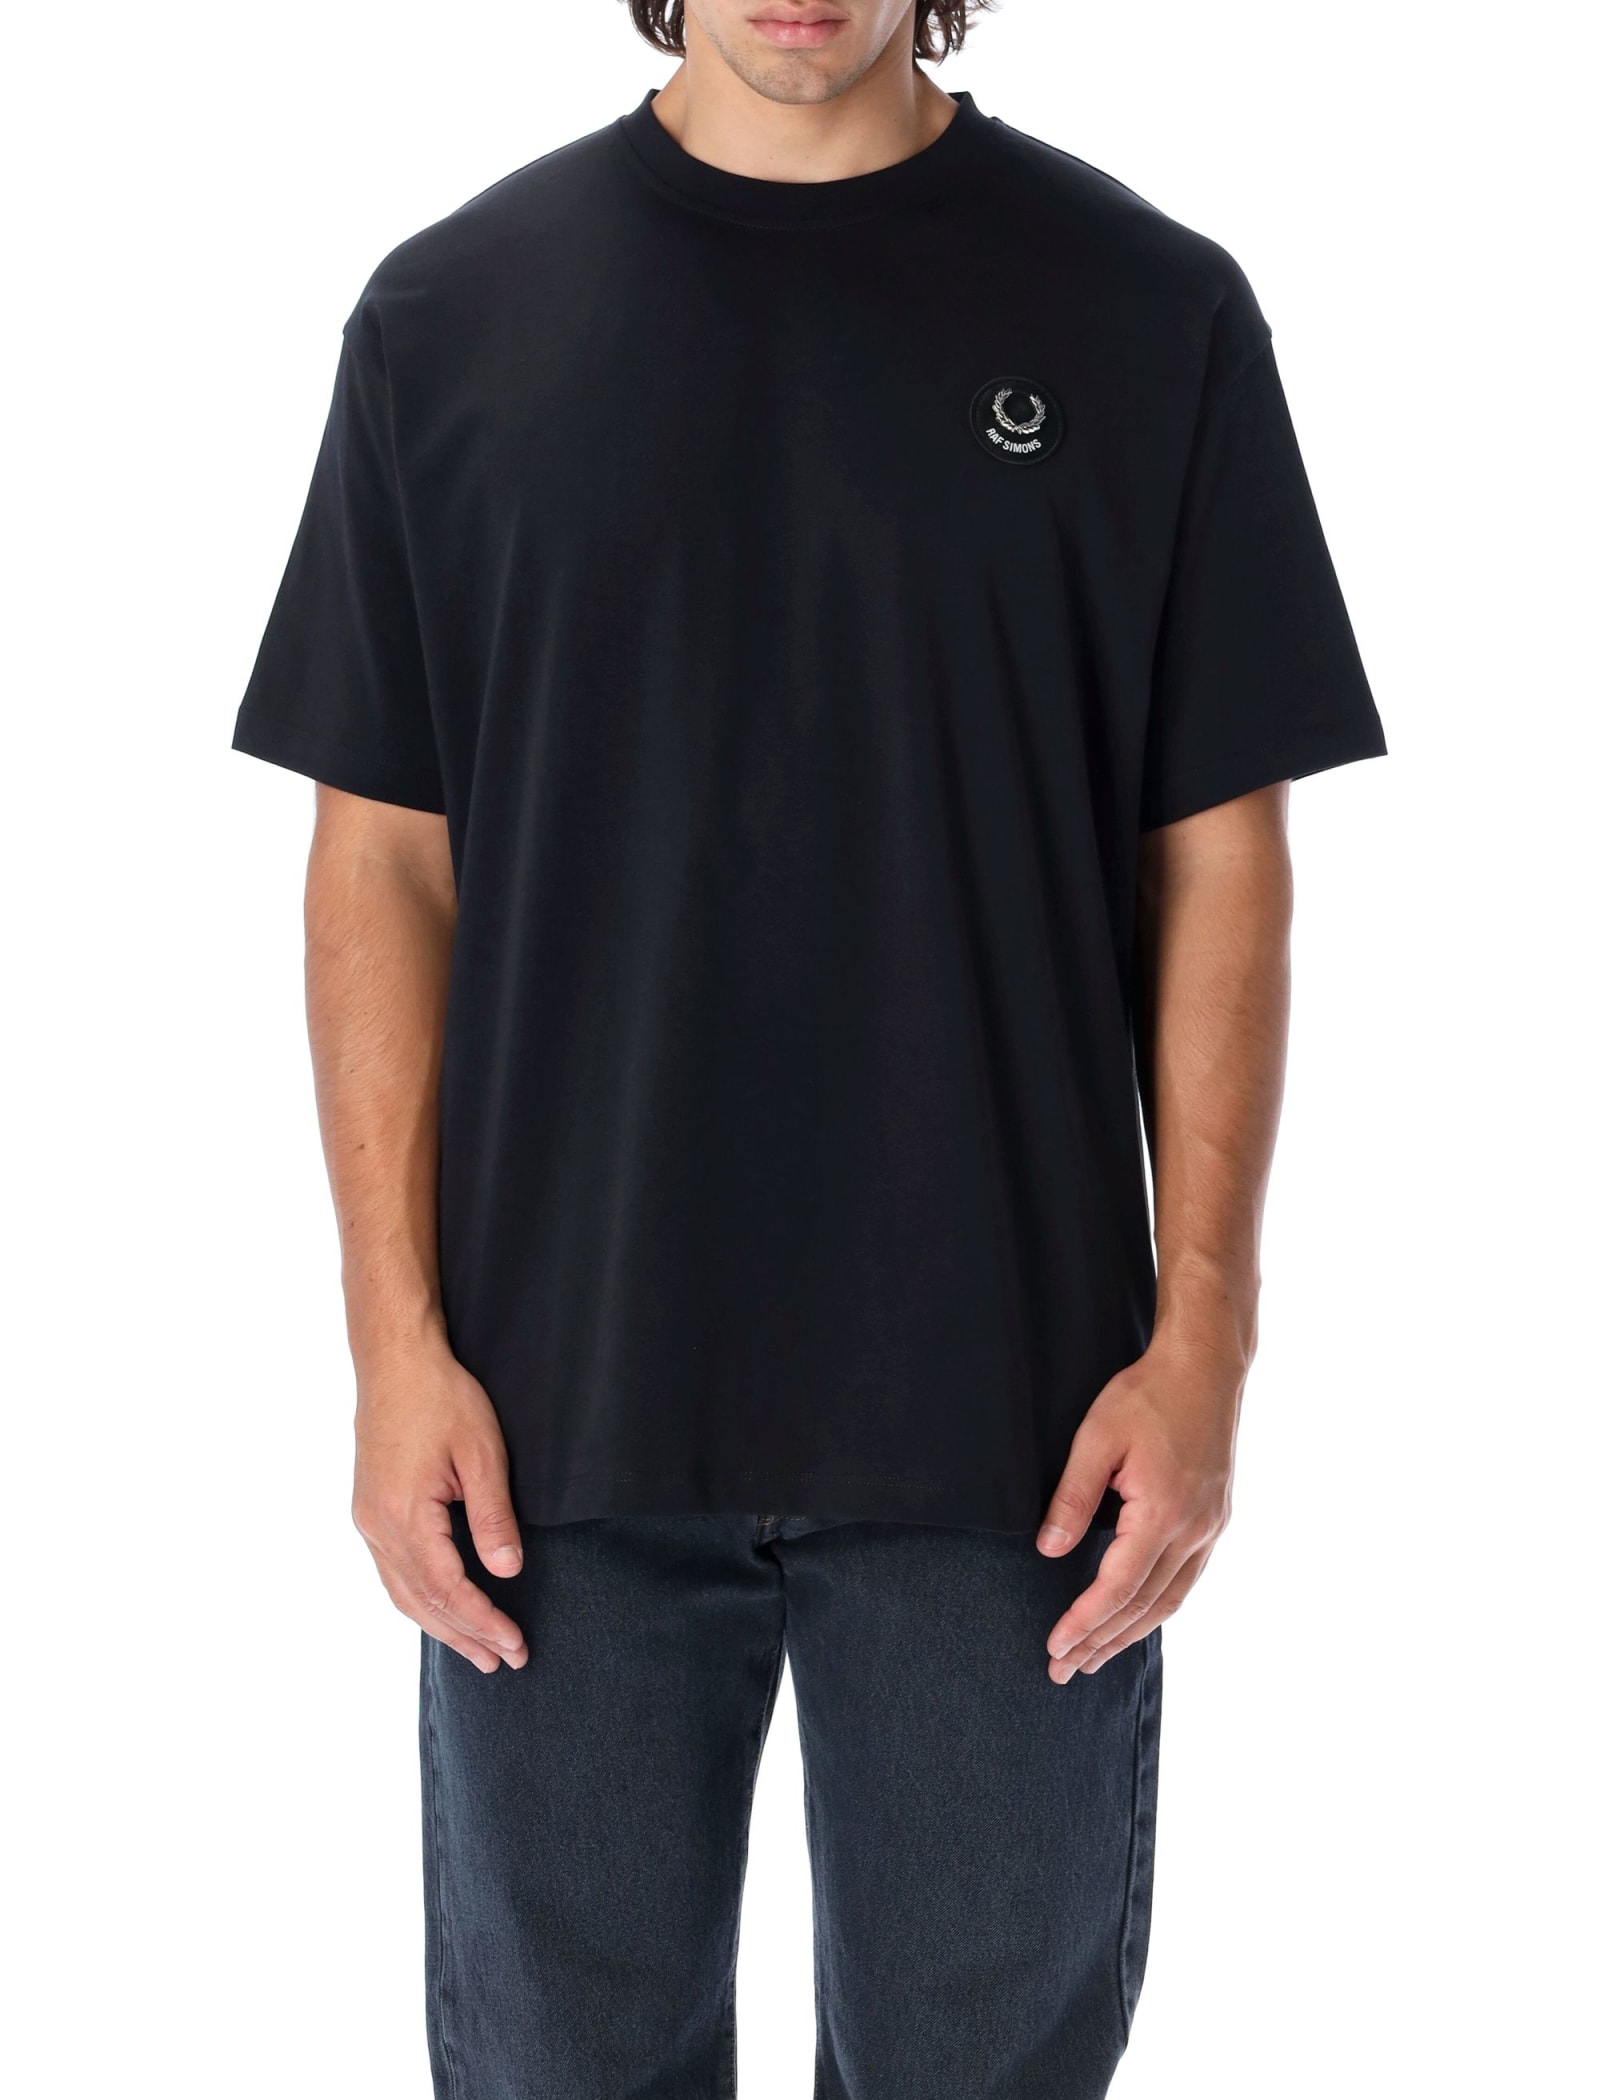 Fred Perry by Raf Simons Oversized Printed T-shirt